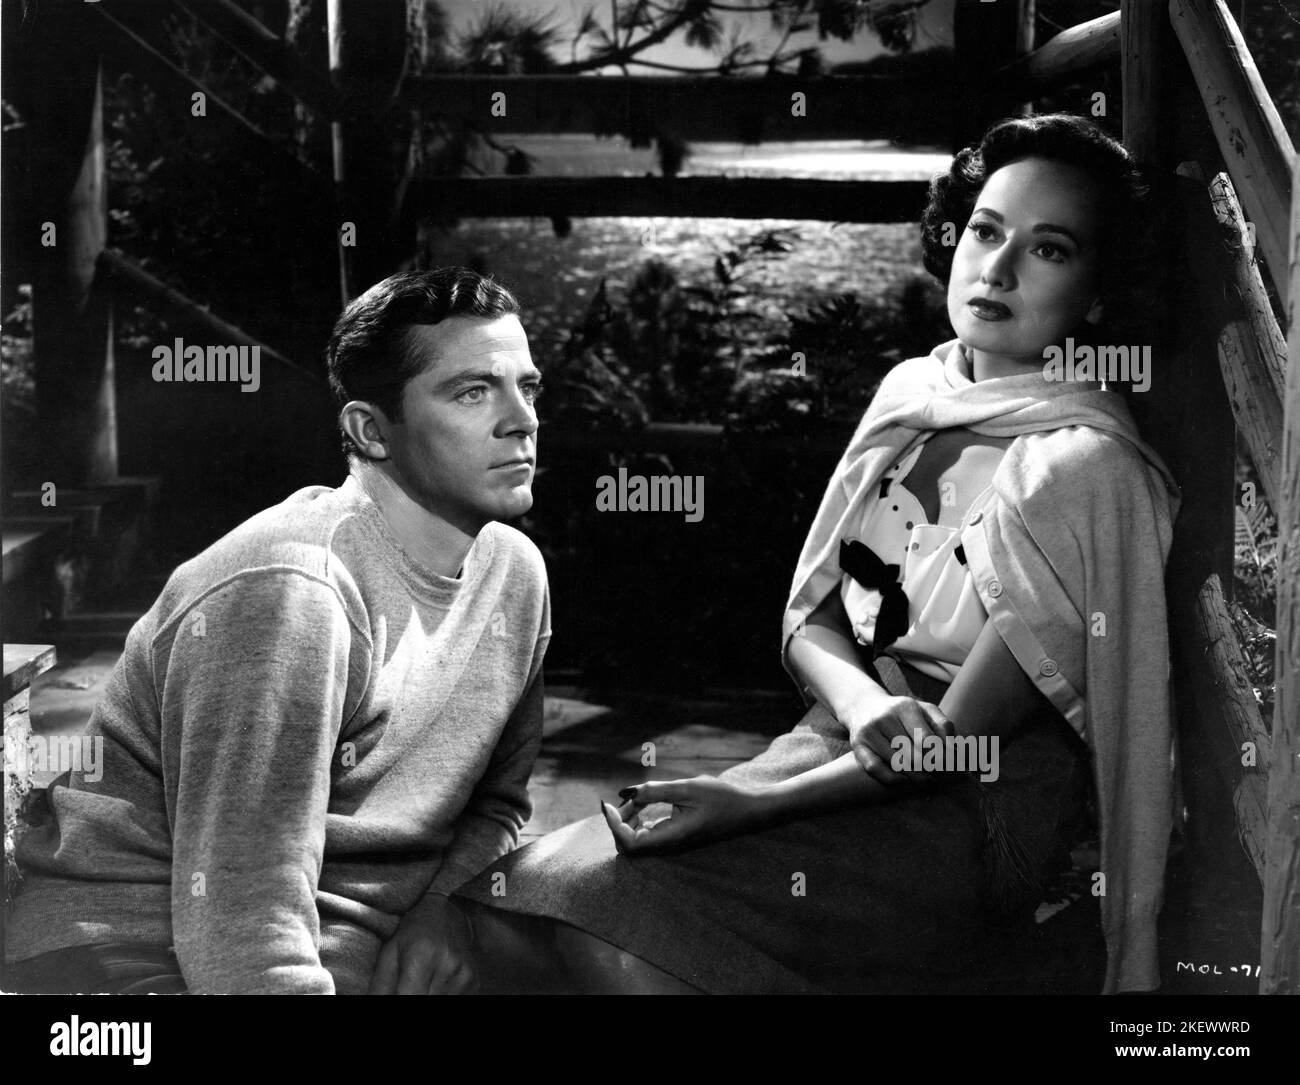 DANA ANDREWS and MERLE OBERON in NIGHT SONG 1947 director JOHN CROMWELL Miss Oberon's gowns Orry-Kelly John Cromwell Productions / RKO Radio Pictures Stock Photo